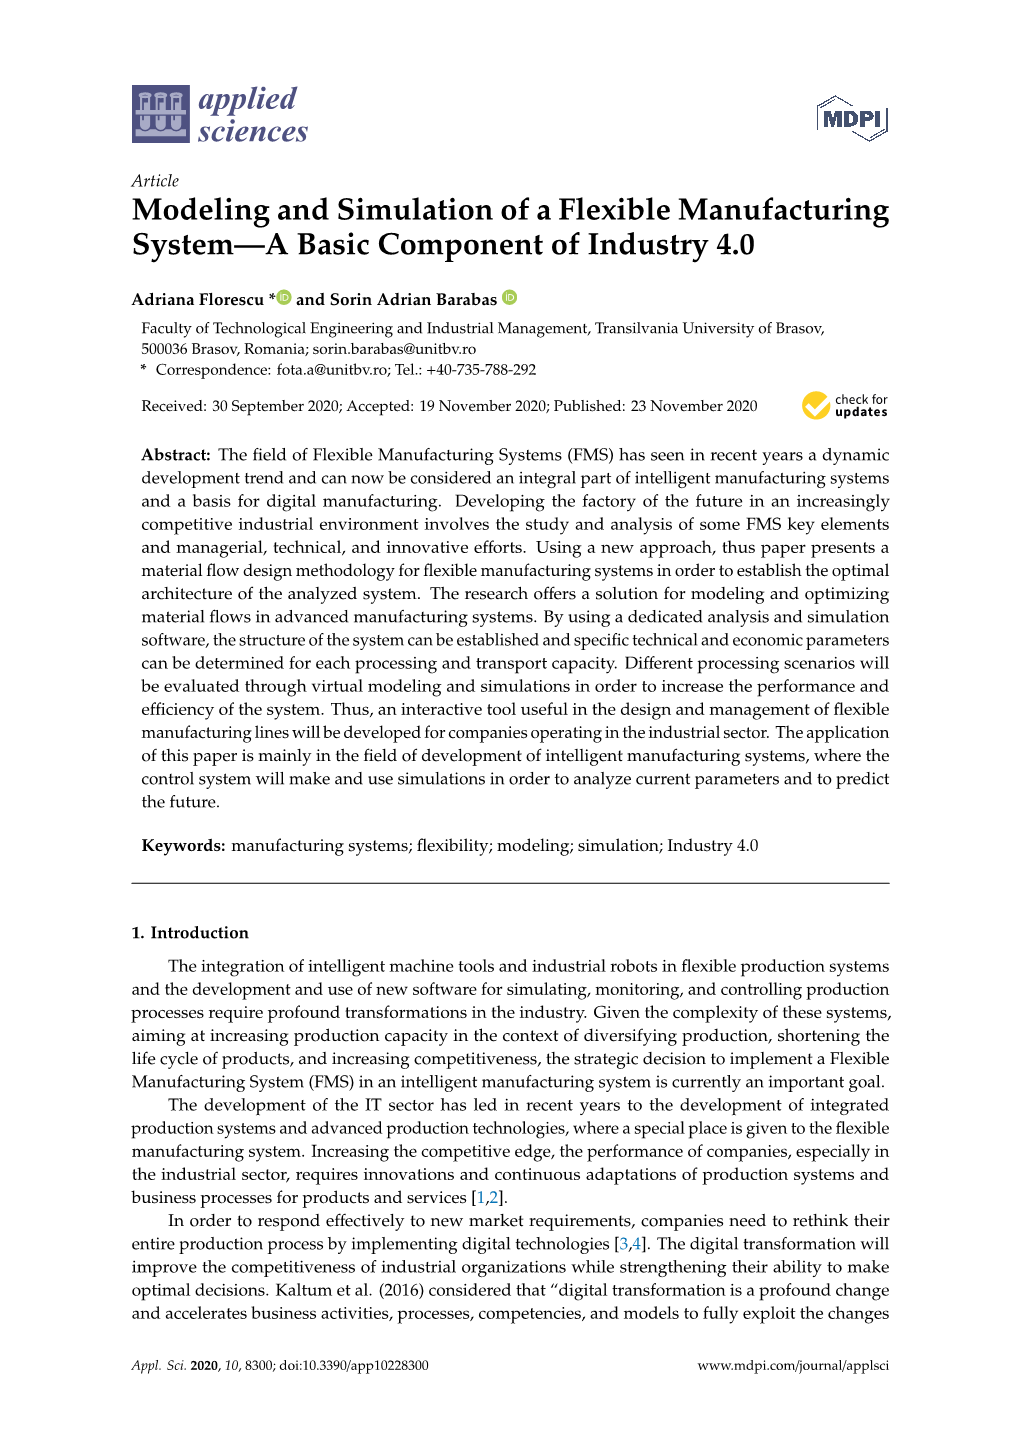 Modeling and Simulation of a Flexible Manufacturing System—A Basic Component of Industry 4.0